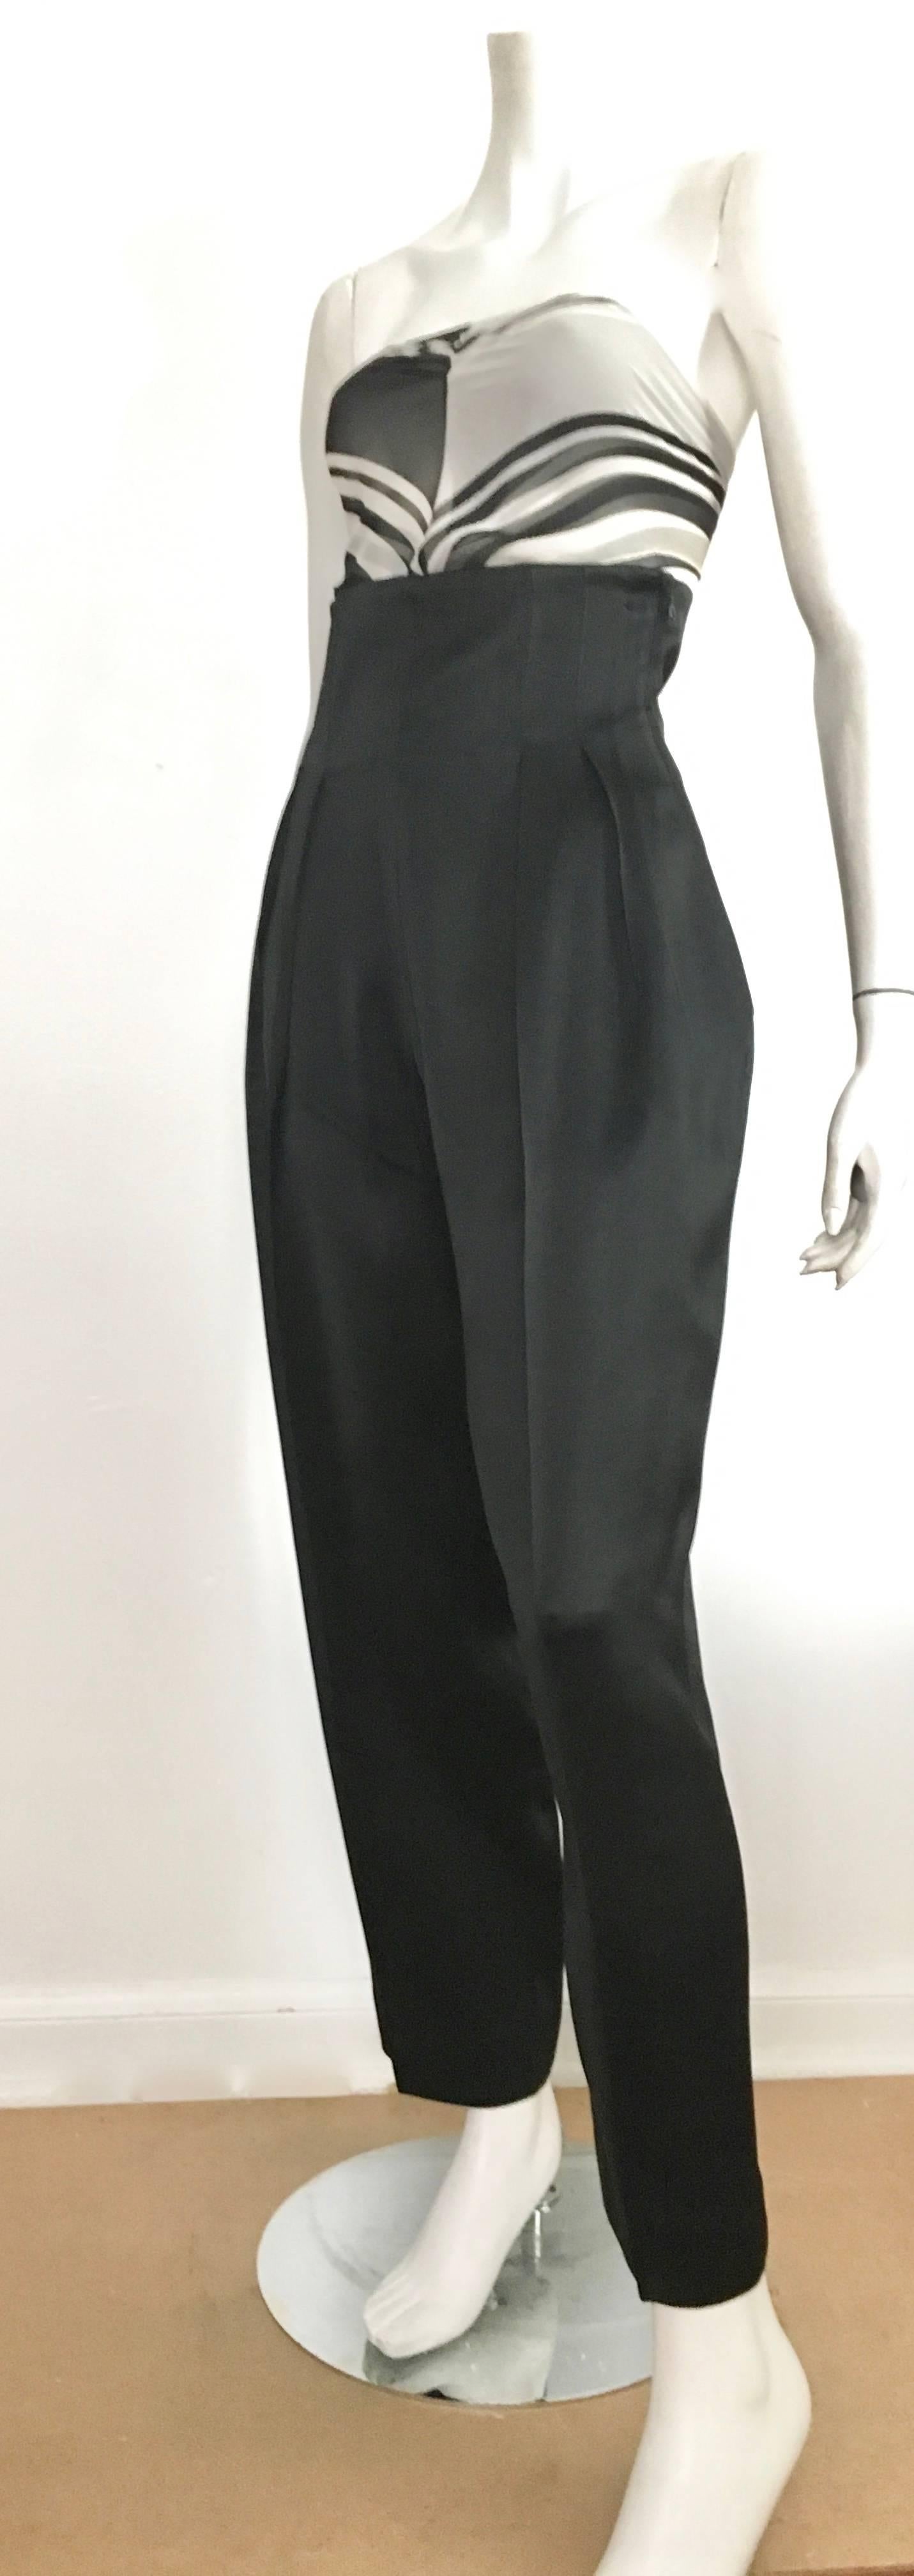 Patrick Kelly 1980s Black High Waisted Evening Pants with Pockets Size 4/6. 9